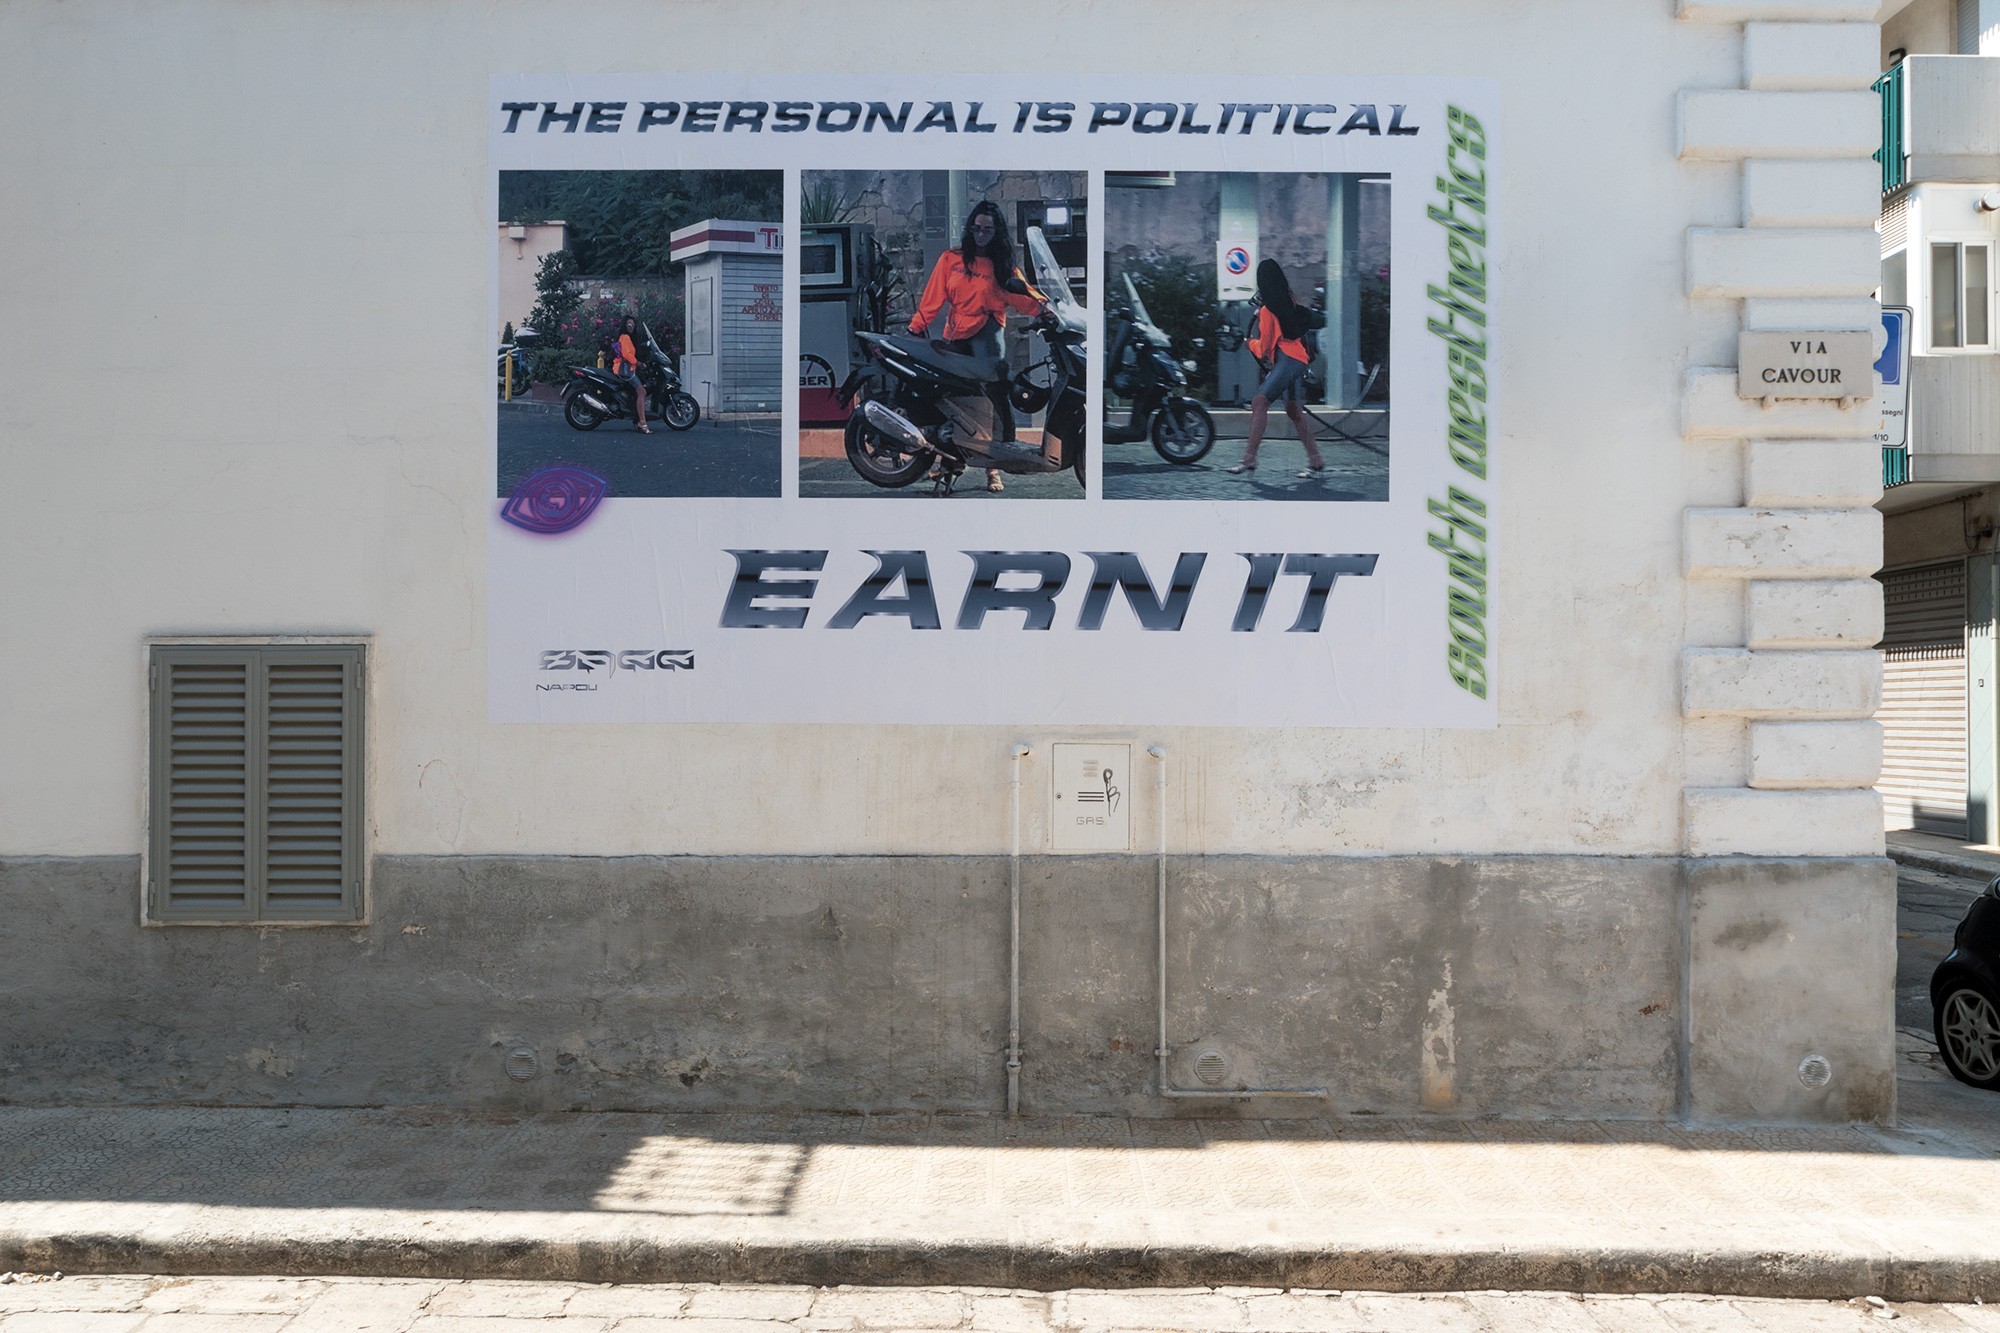 SAGG Napoli, The personal is political - Earn it. 2018 - Digital collage on billboard, lights, 500 x 350 cm.